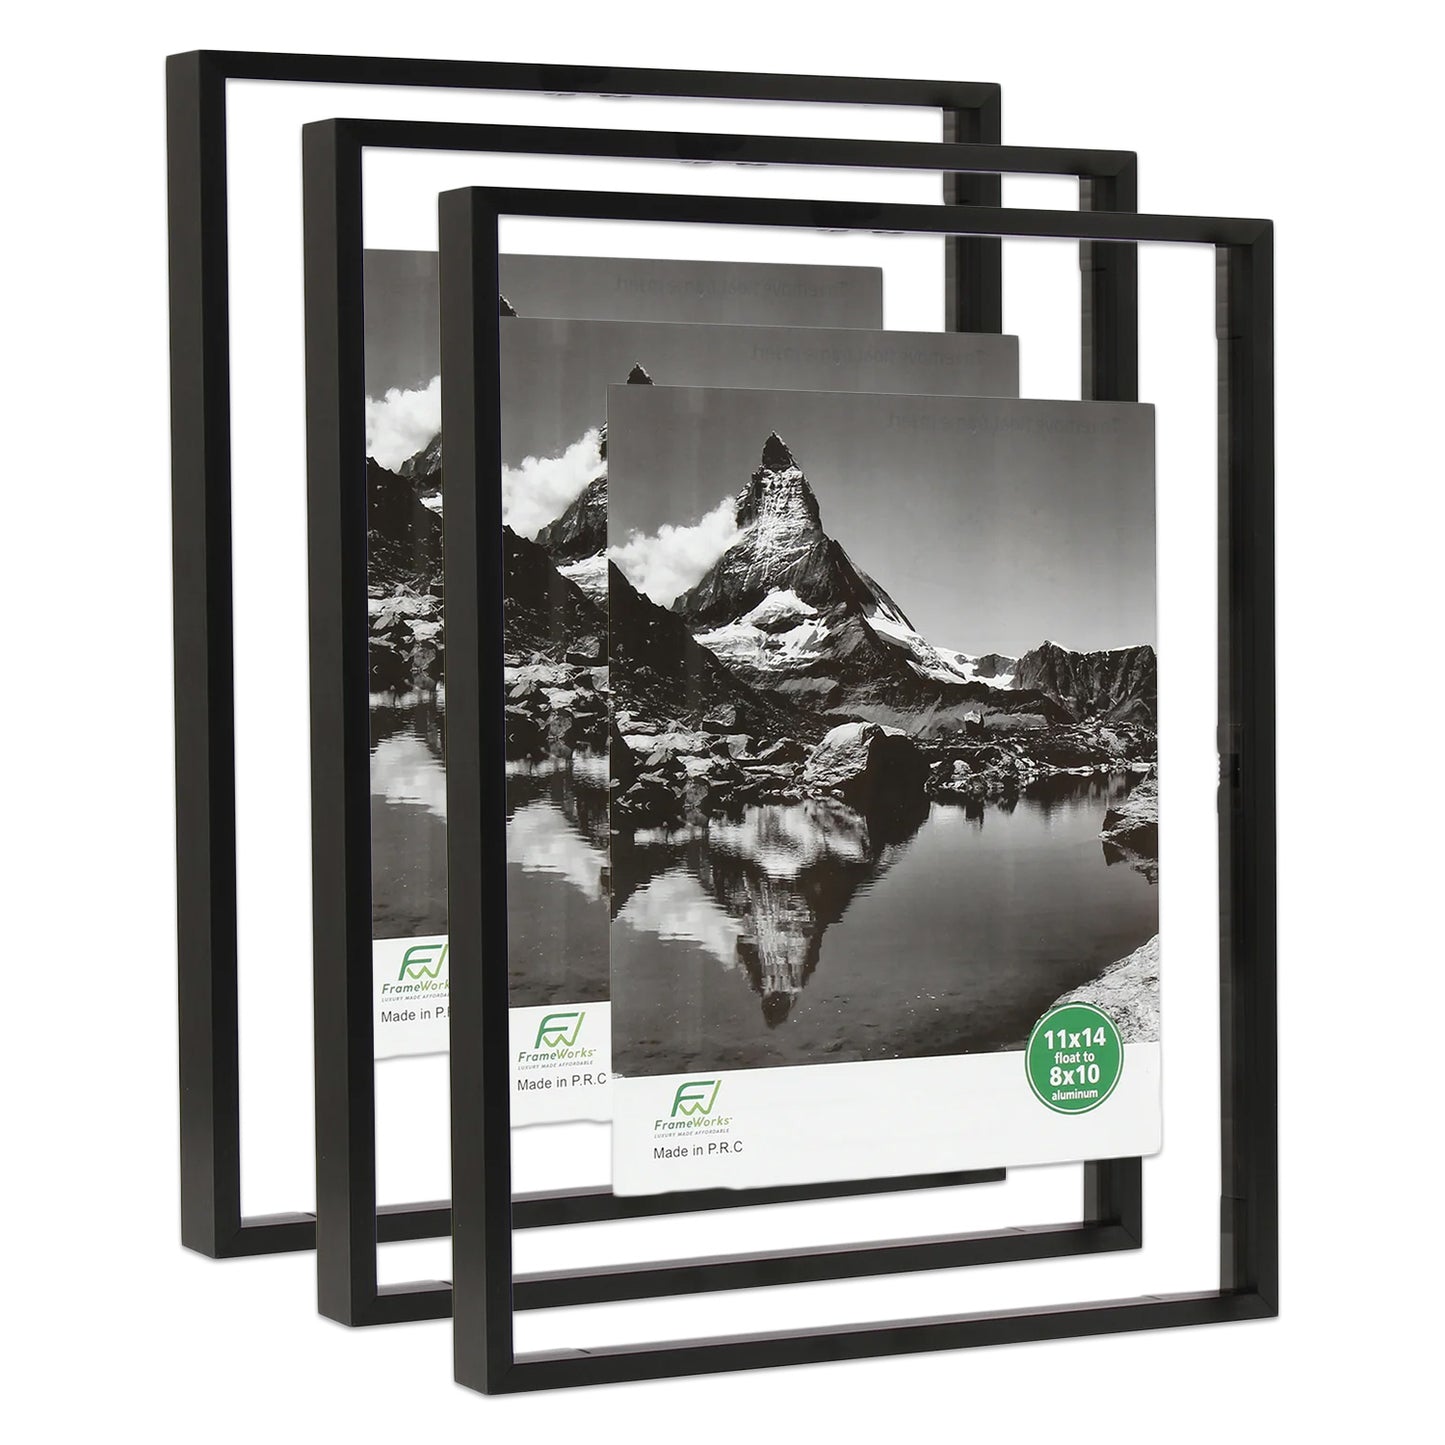 11" x 14" Deluxe Black Aluminum Contemporary Floating Picture Frame with Tempered Glass